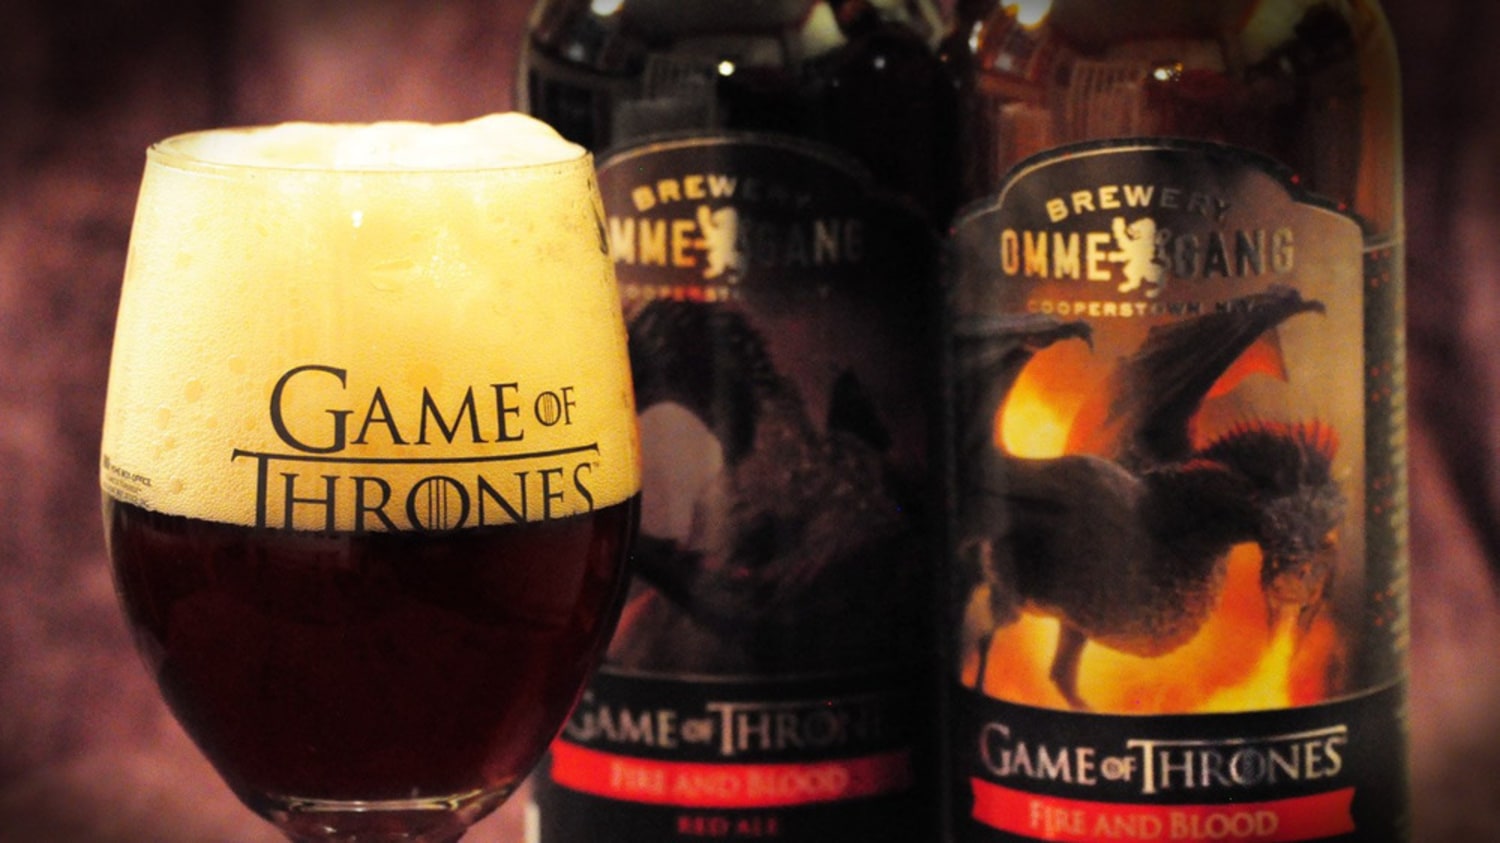 Beer Coaster ~ OMMEGANG Game of Thrones Fire & Blood Red Ale ~ Cooperstown NY 